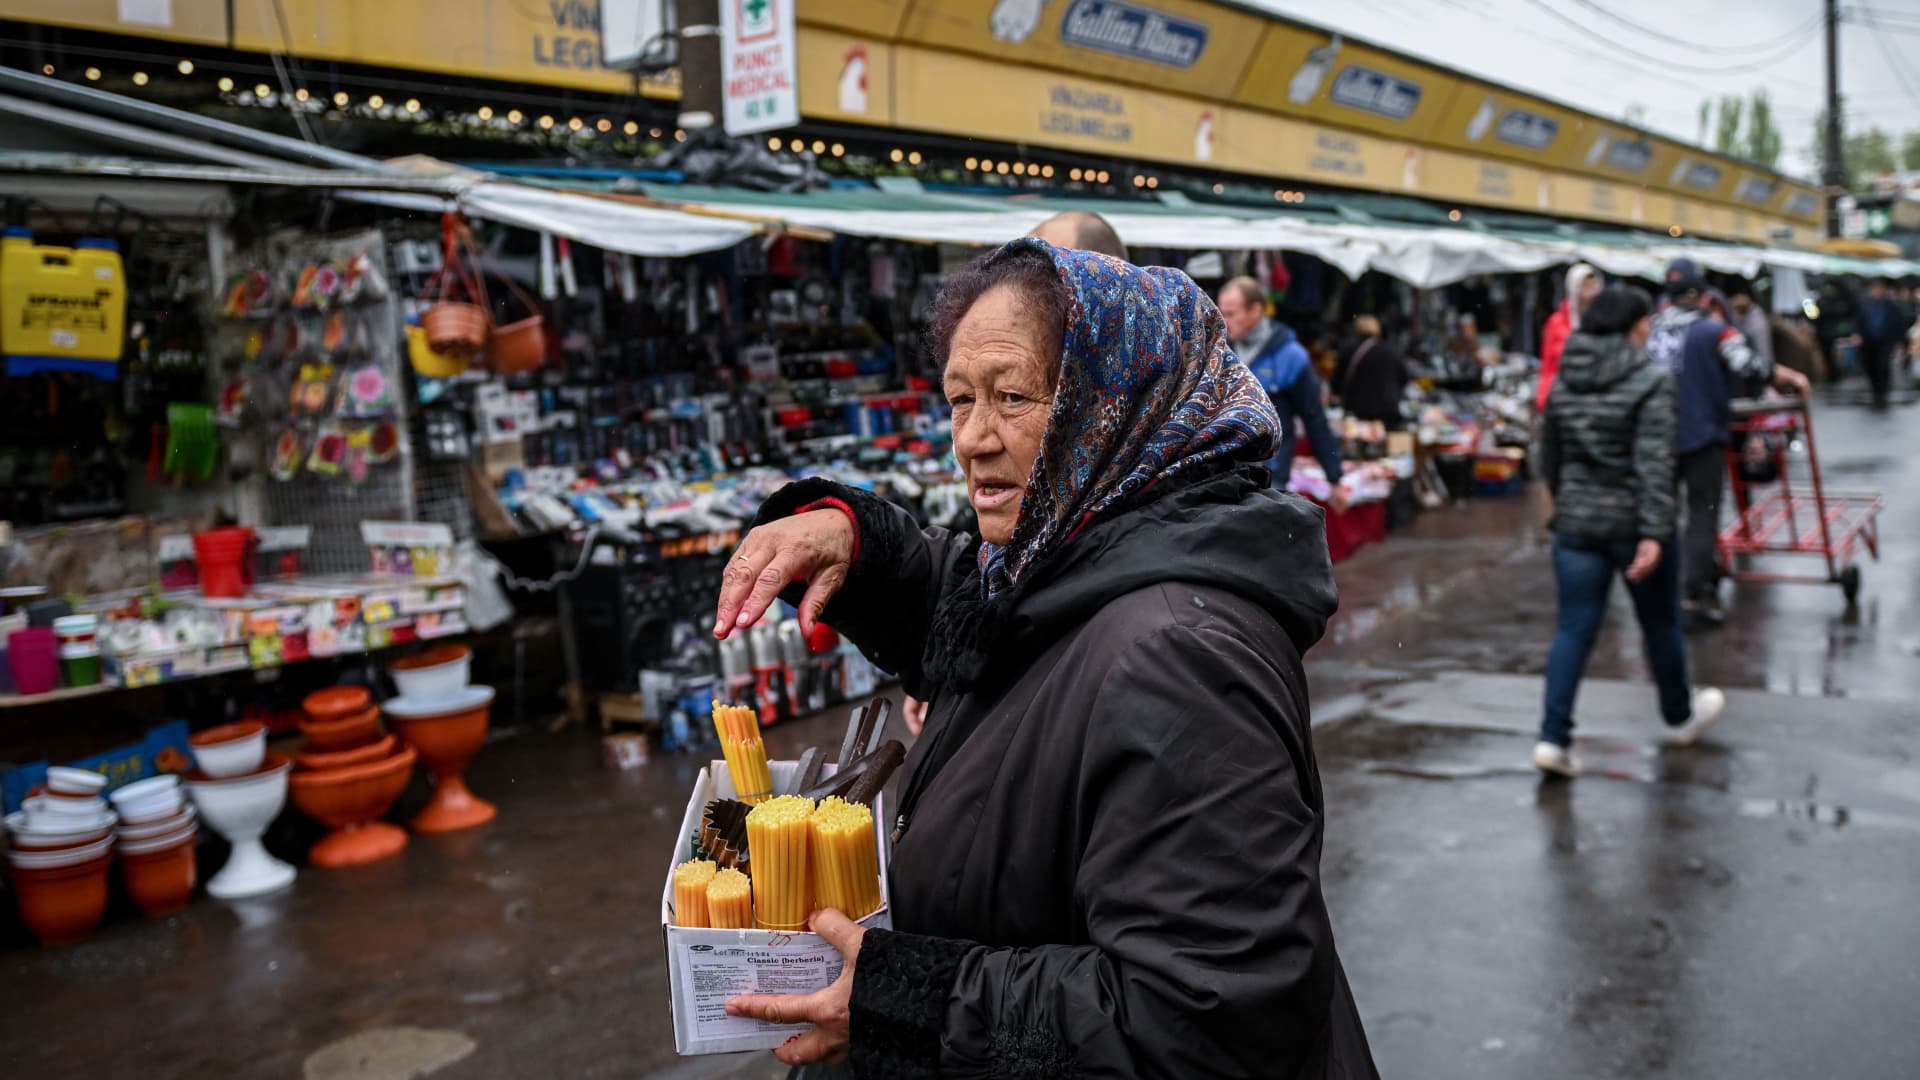 A woman selling candles and incense at the central market in Chisinau, Moldova, on April 29, 2022.